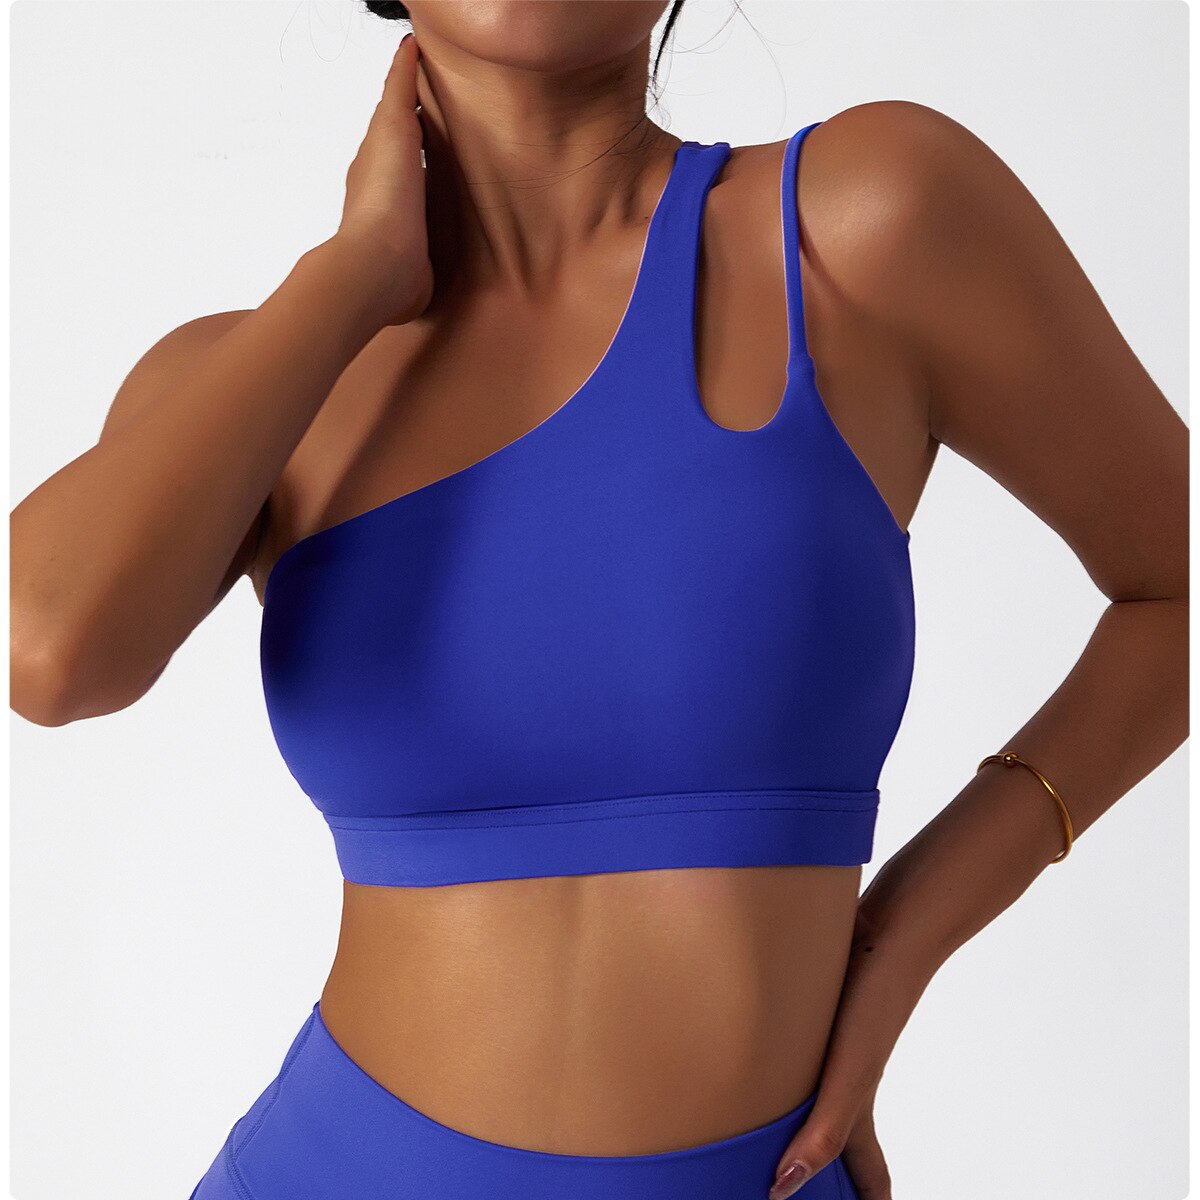 Wireless Deep V Yoga Bras M Size For Women Push Up, Padded, Thin Nylon,  Ideal For Gym, Workout, Daily Fitness And Sleepwear From Liantiku, $23.82